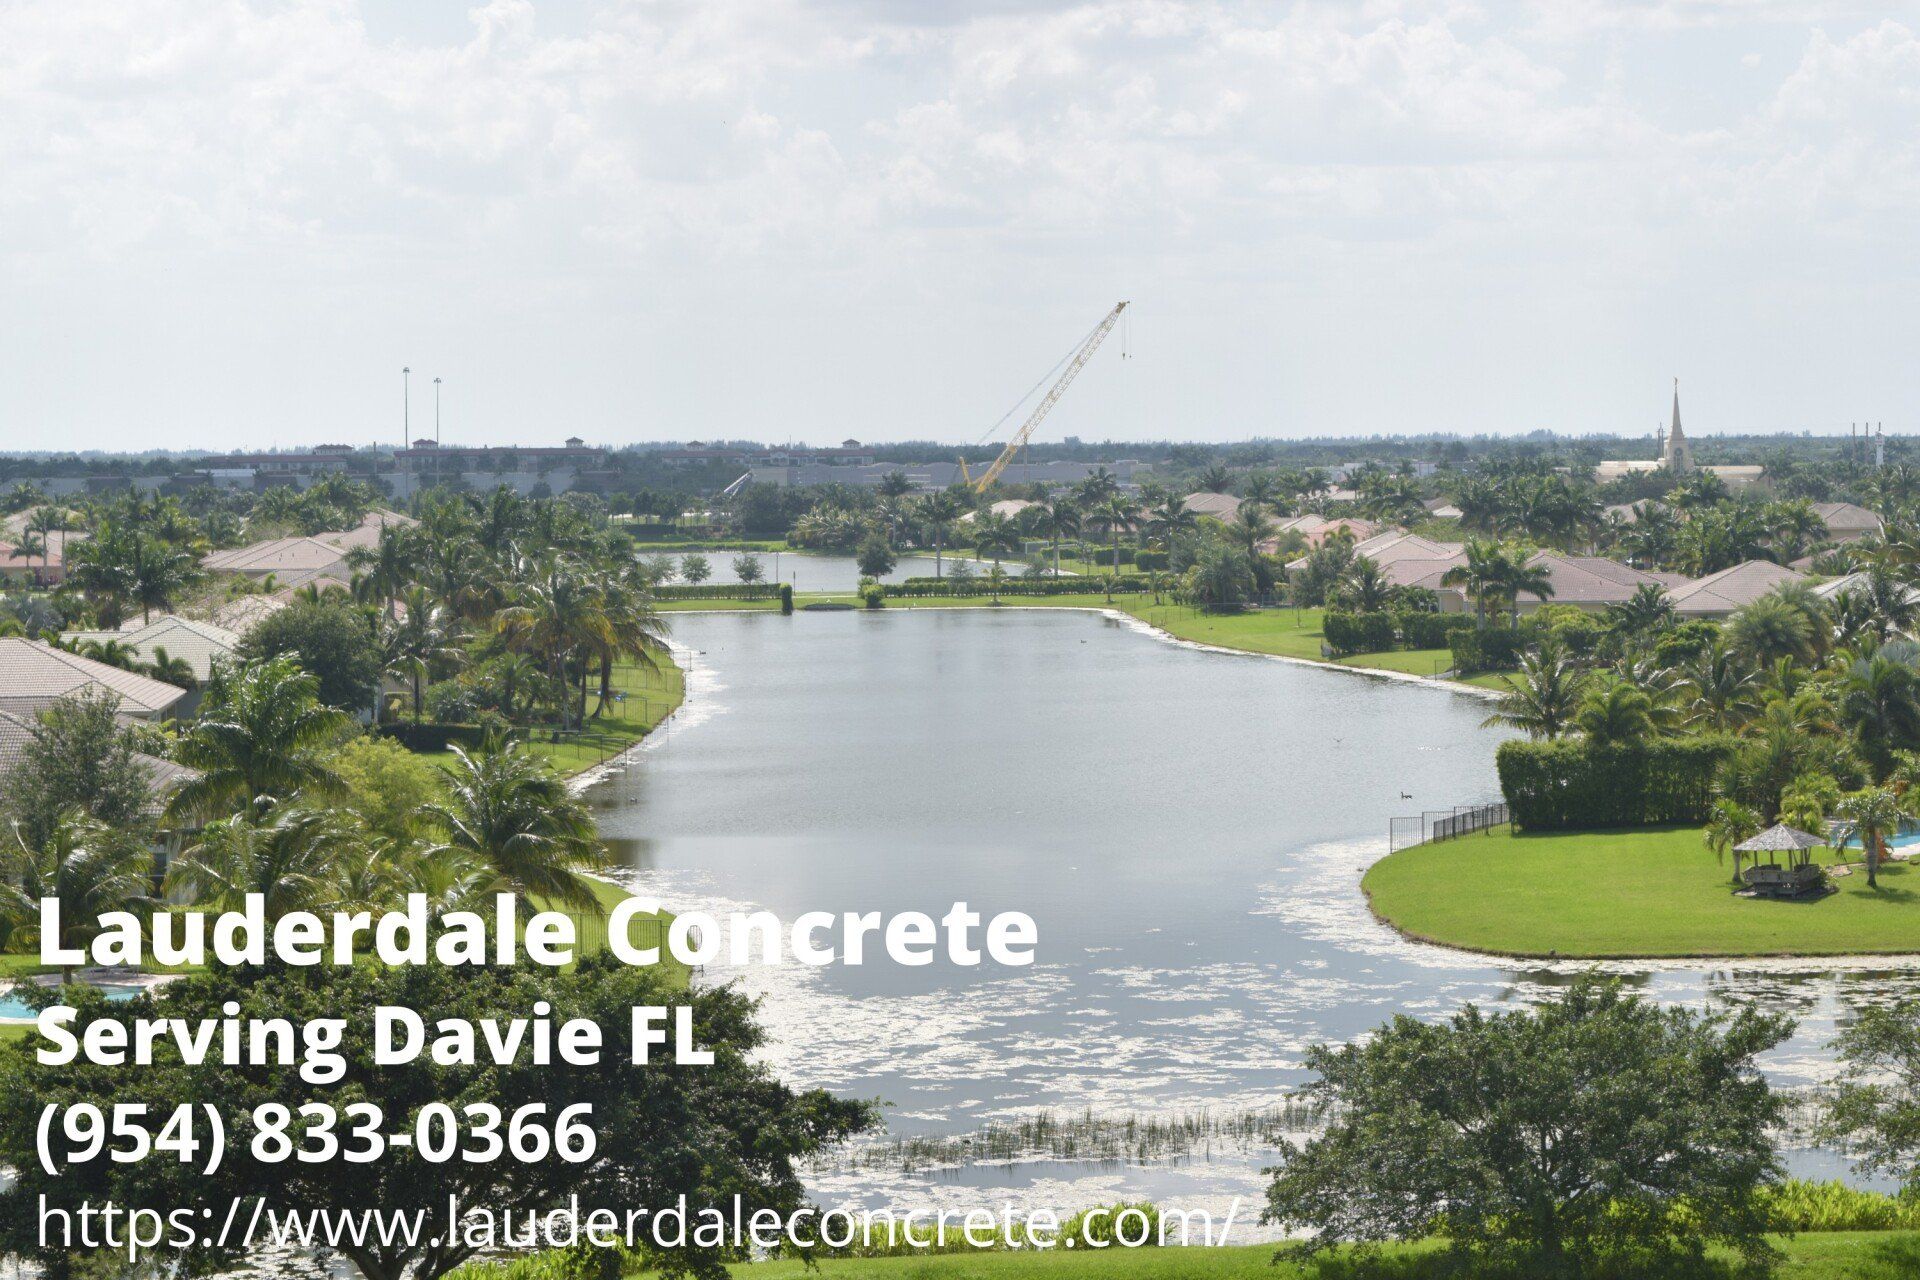 this landscape photo is taken from Davie FL - one of the service areas of Lauderdale Concrete